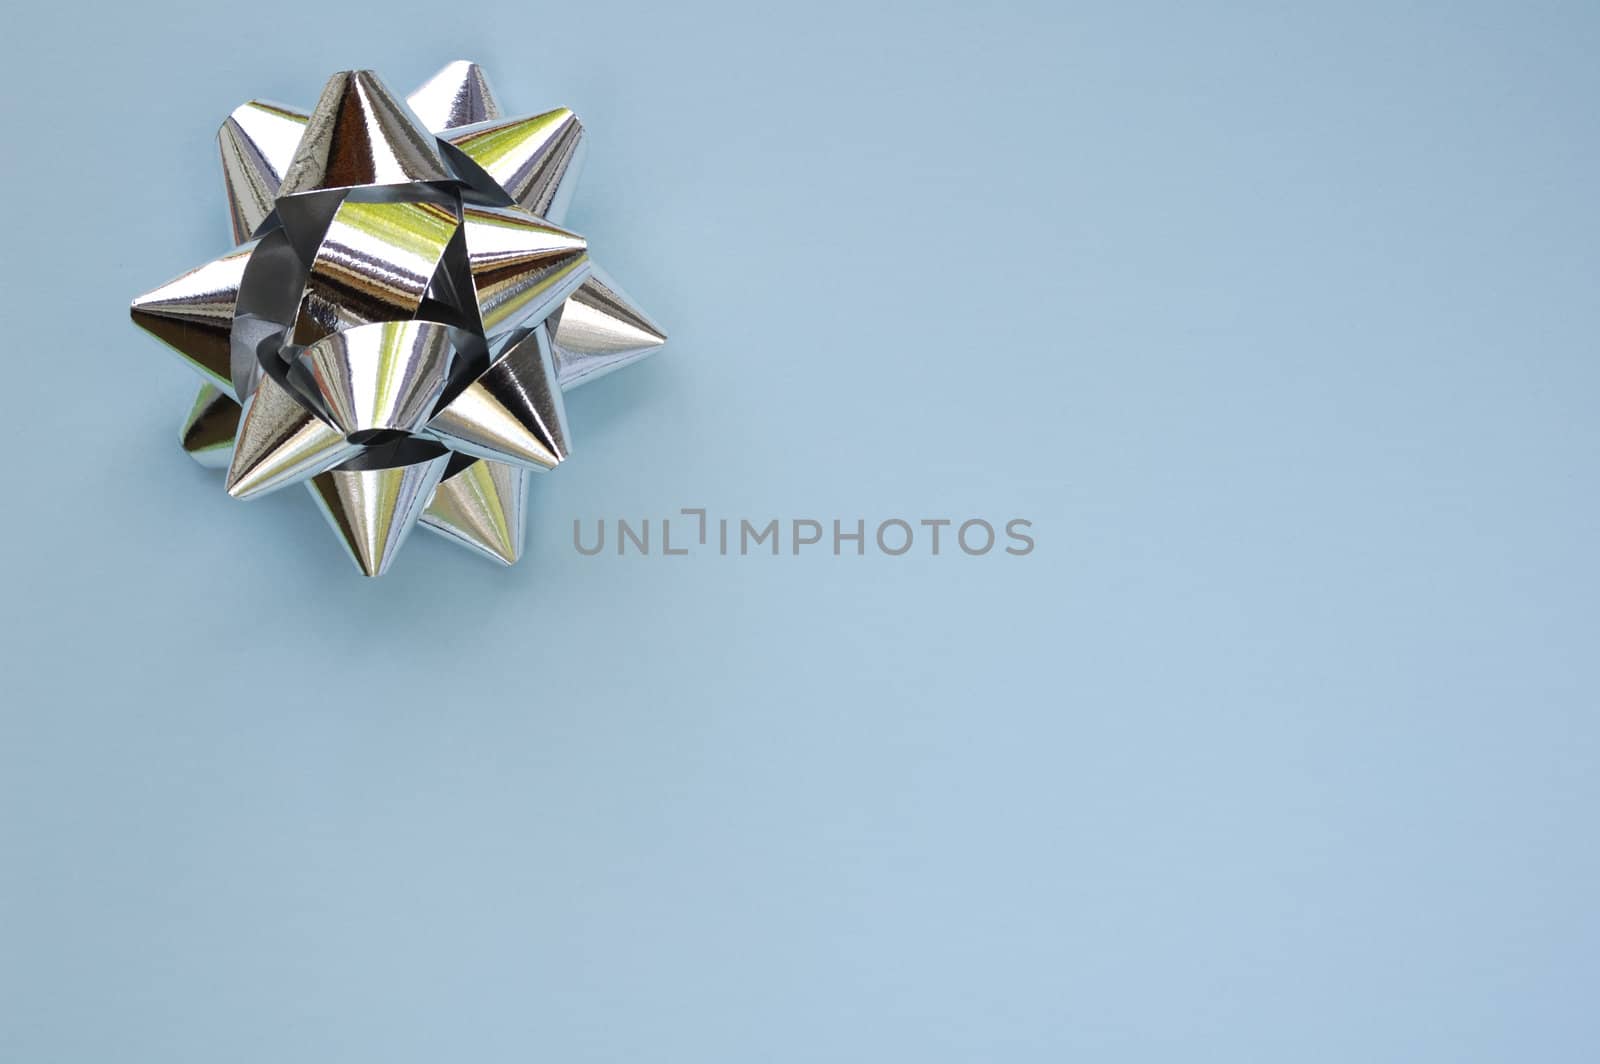 A decorative star, made from silver ribbon, on a plain, pale blue background with space for text (copy).